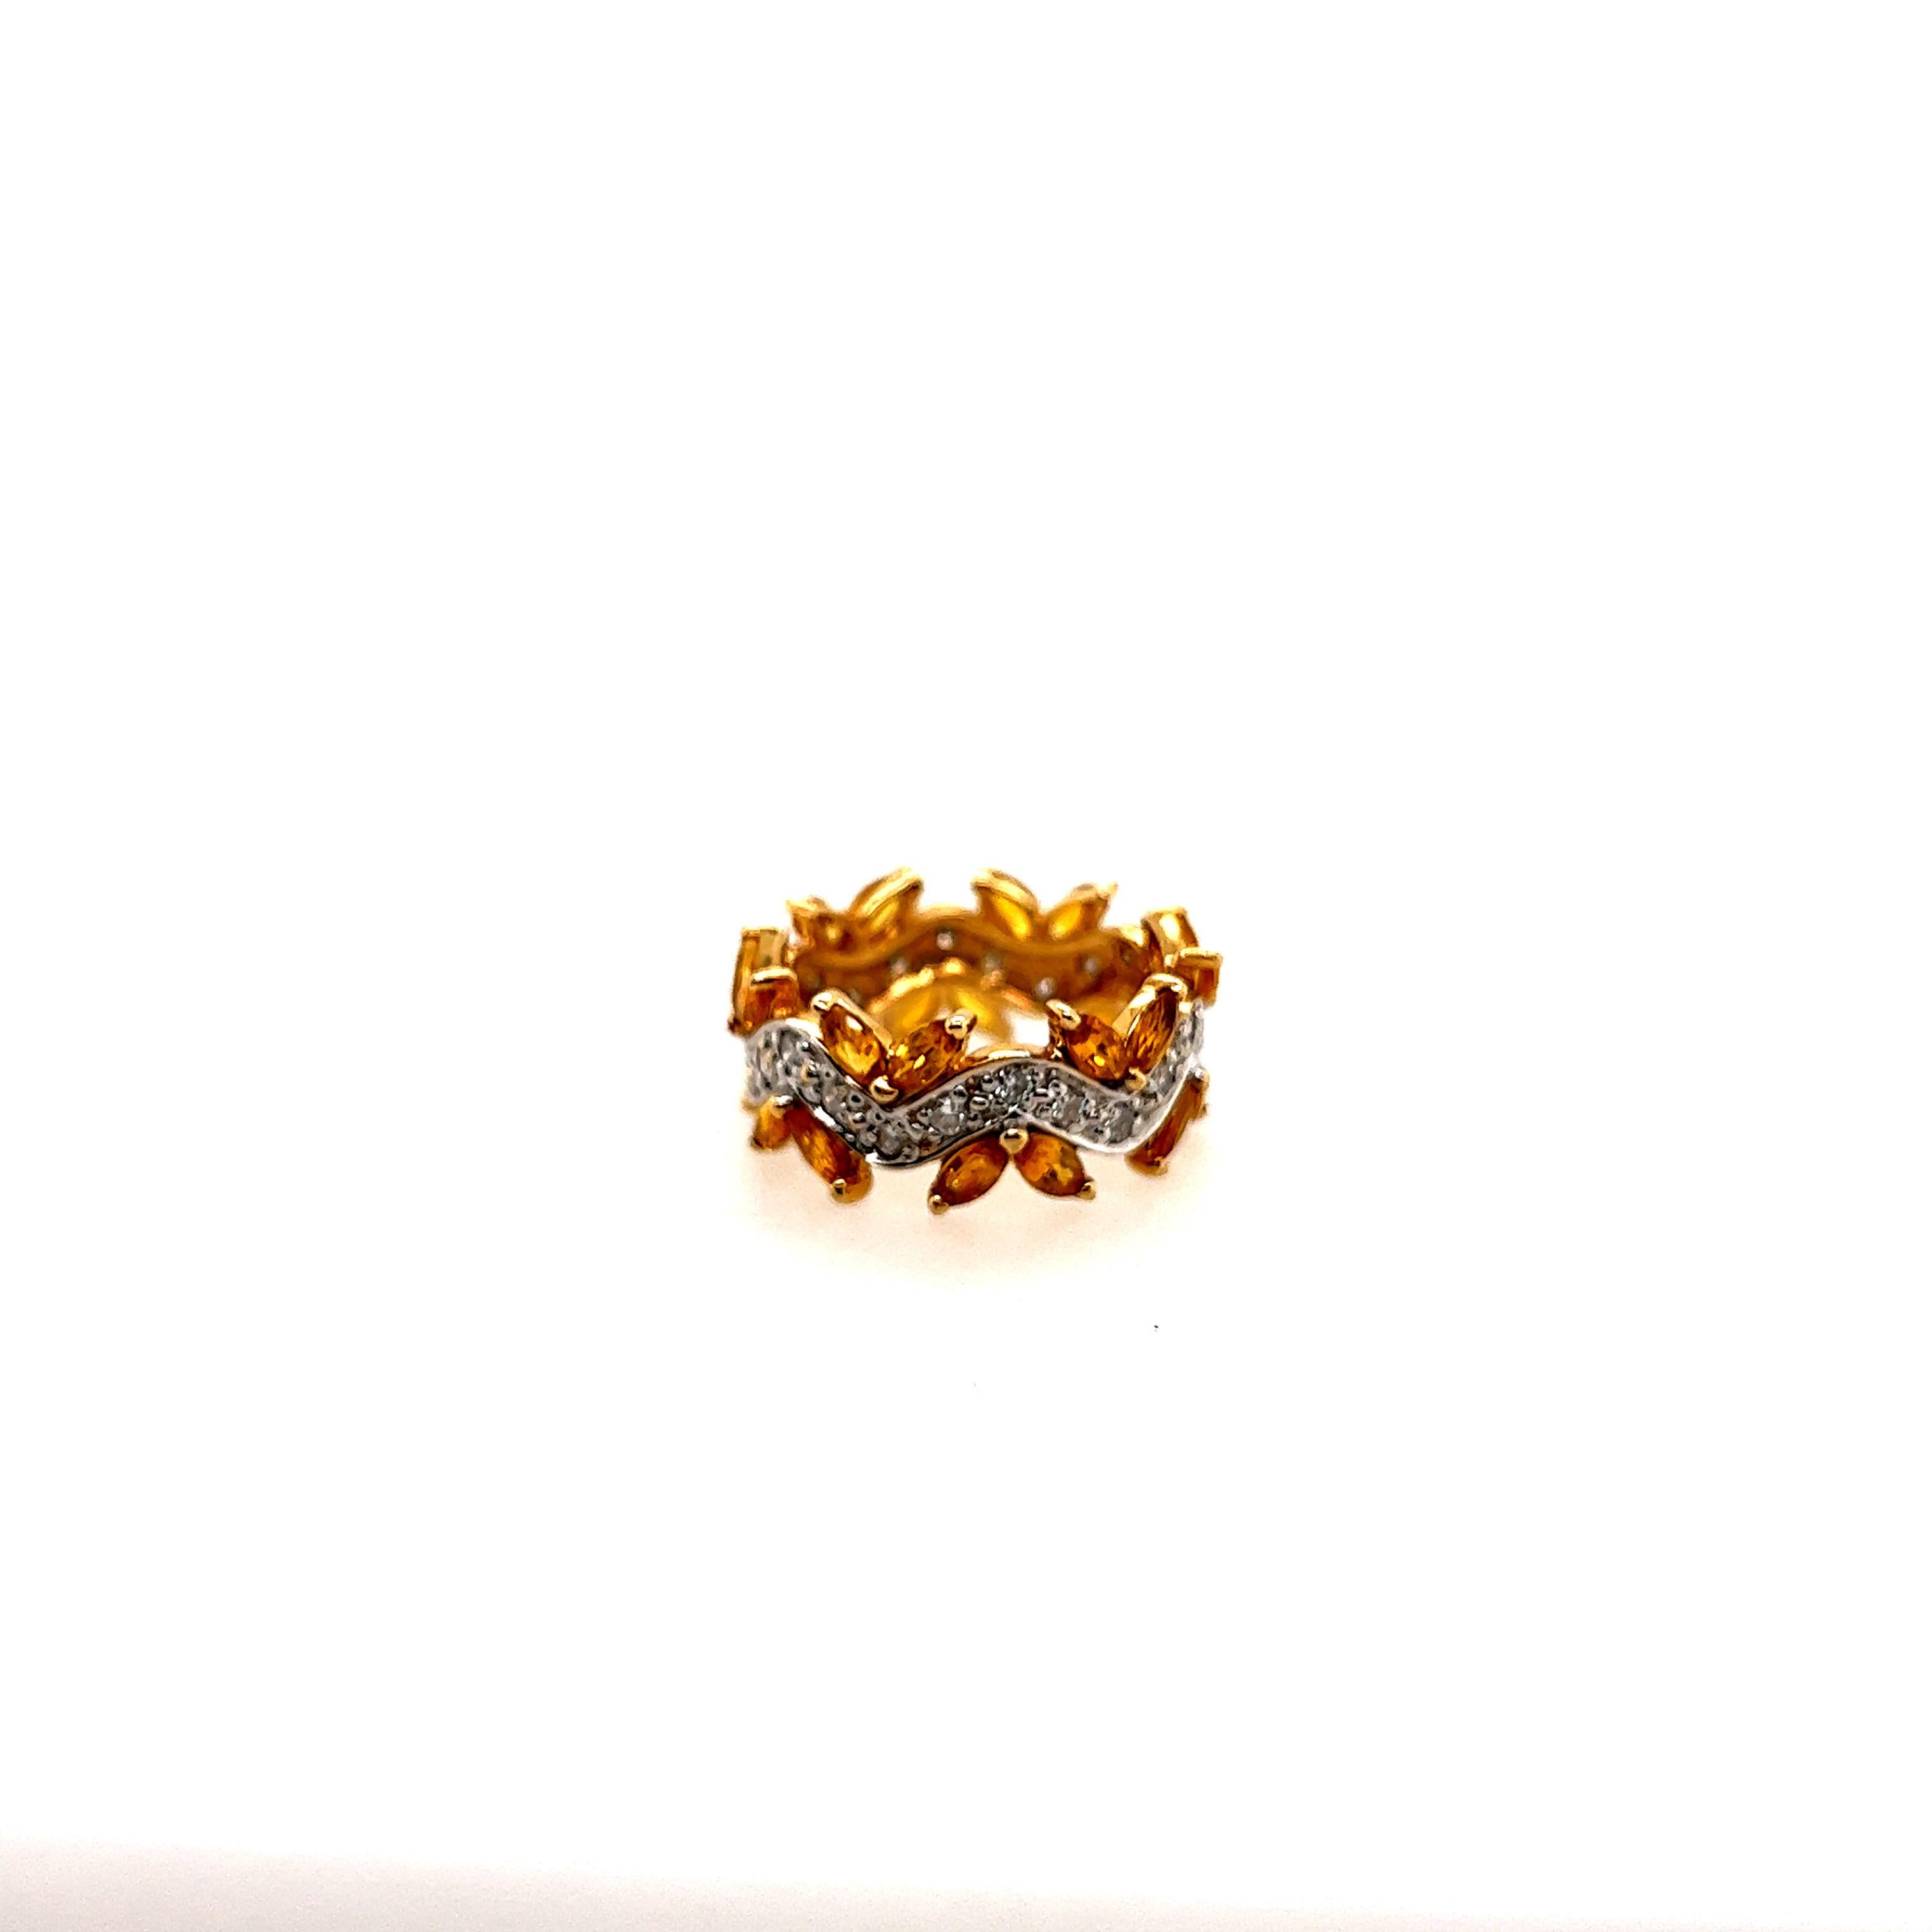 Retro 14k Yellow Gold 3 Carat Total Weight Natural Yellow Sapphire & Diamond Cocktail Ring, Circa 1970.

The ring is set with 24 marquise shaped natural yellow sapphires weighing 2.50 carats as well as 24 natural full cut round diamonds,